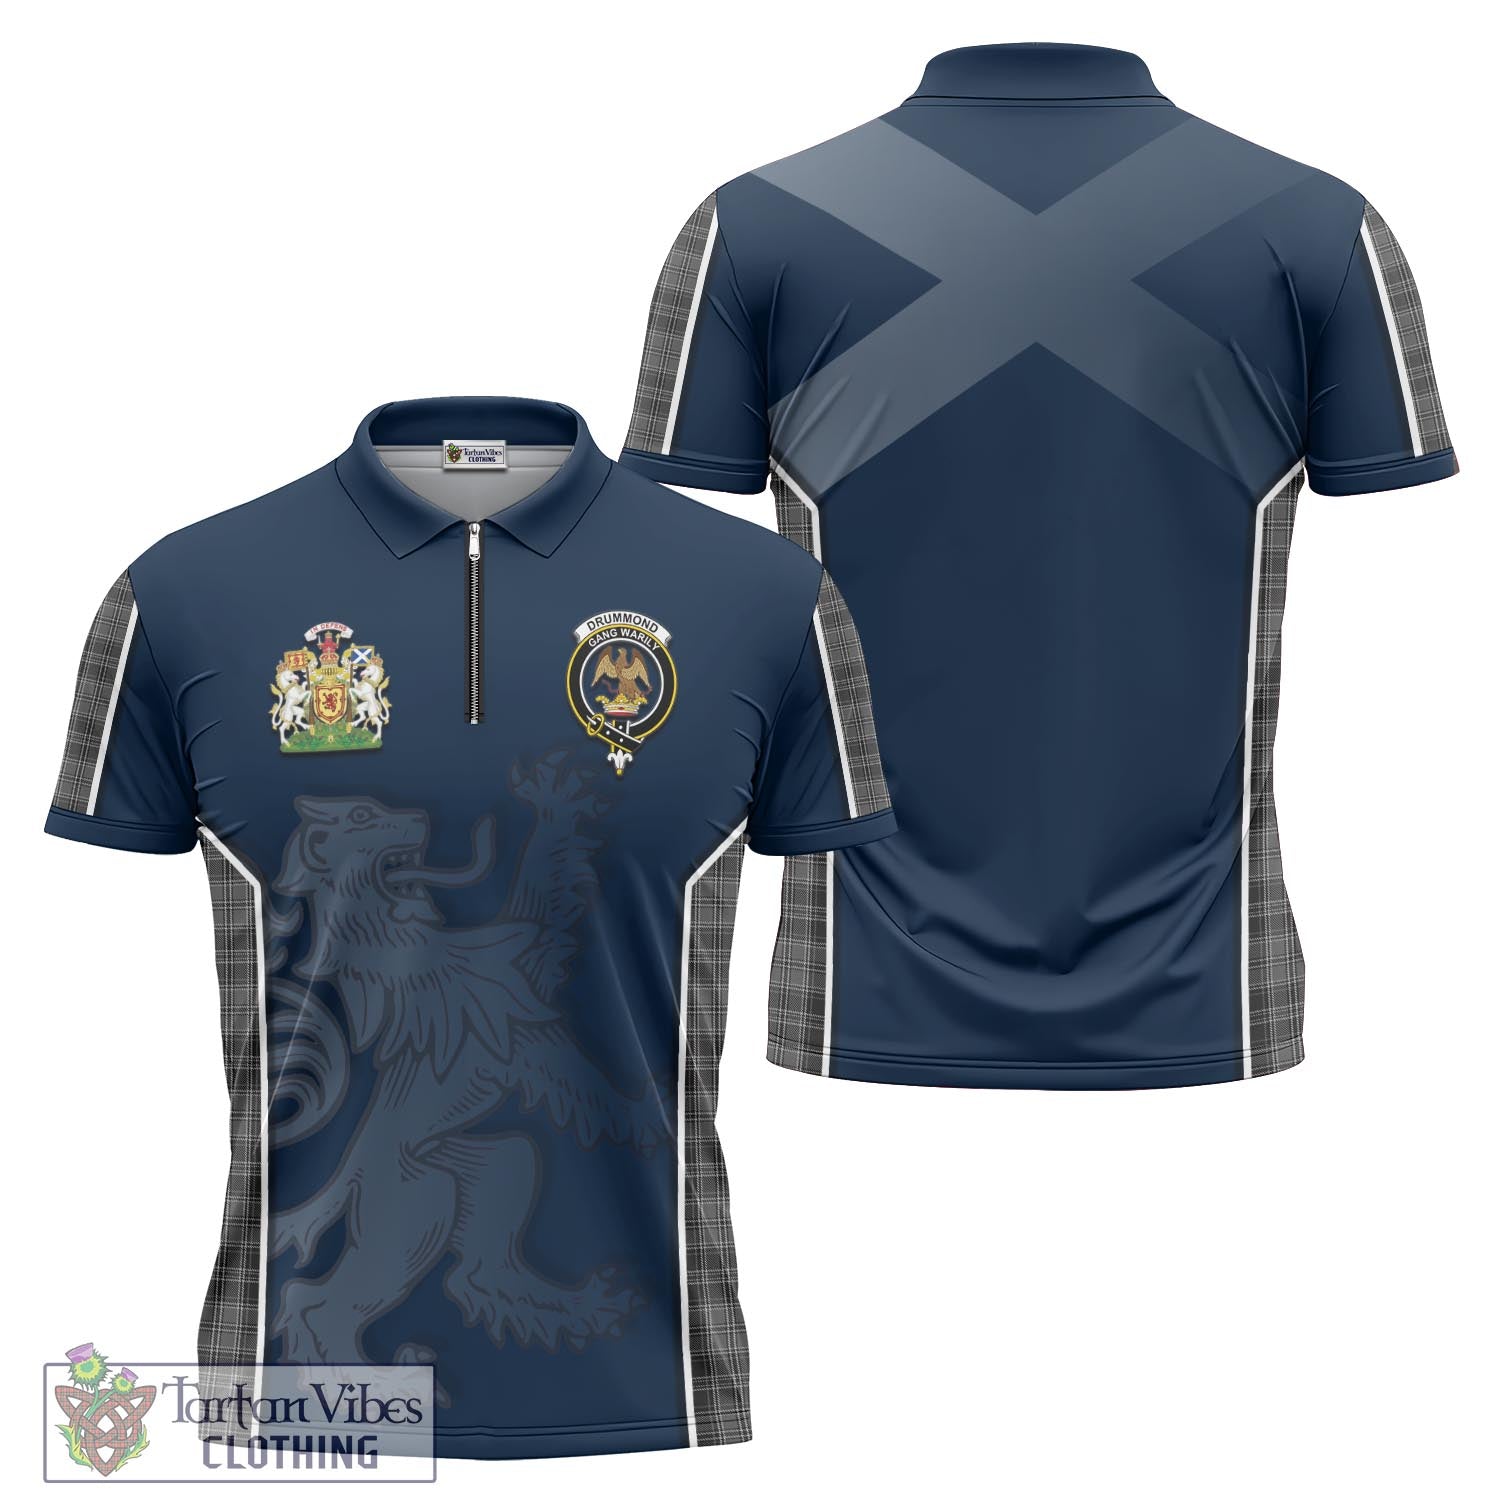 Tartan Vibes Clothing Drummond Grey Tartan Zipper Polo Shirt with Family Crest and Lion Rampant Vibes Sport Style